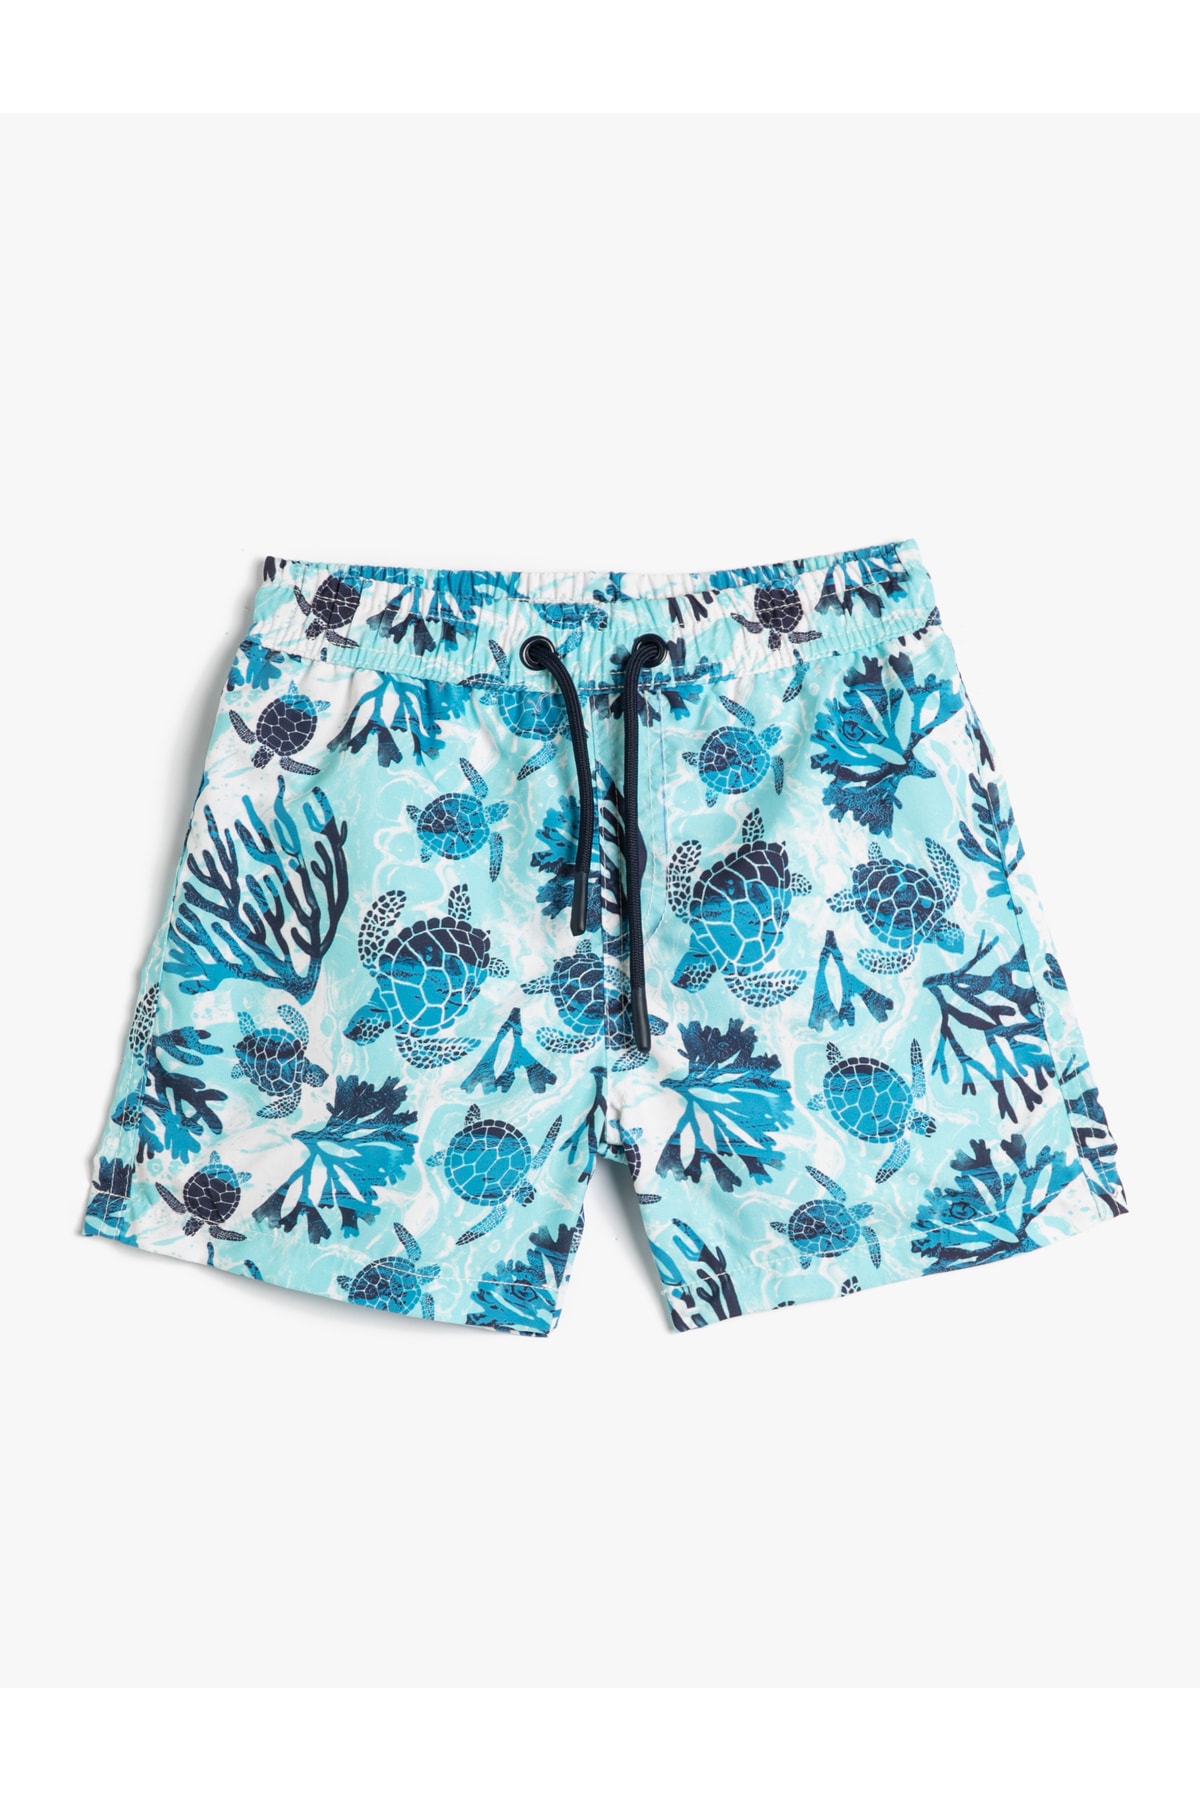 Levně Koton Marine Shorts with a Tie Waist Turtle Printed Mesh Lined.